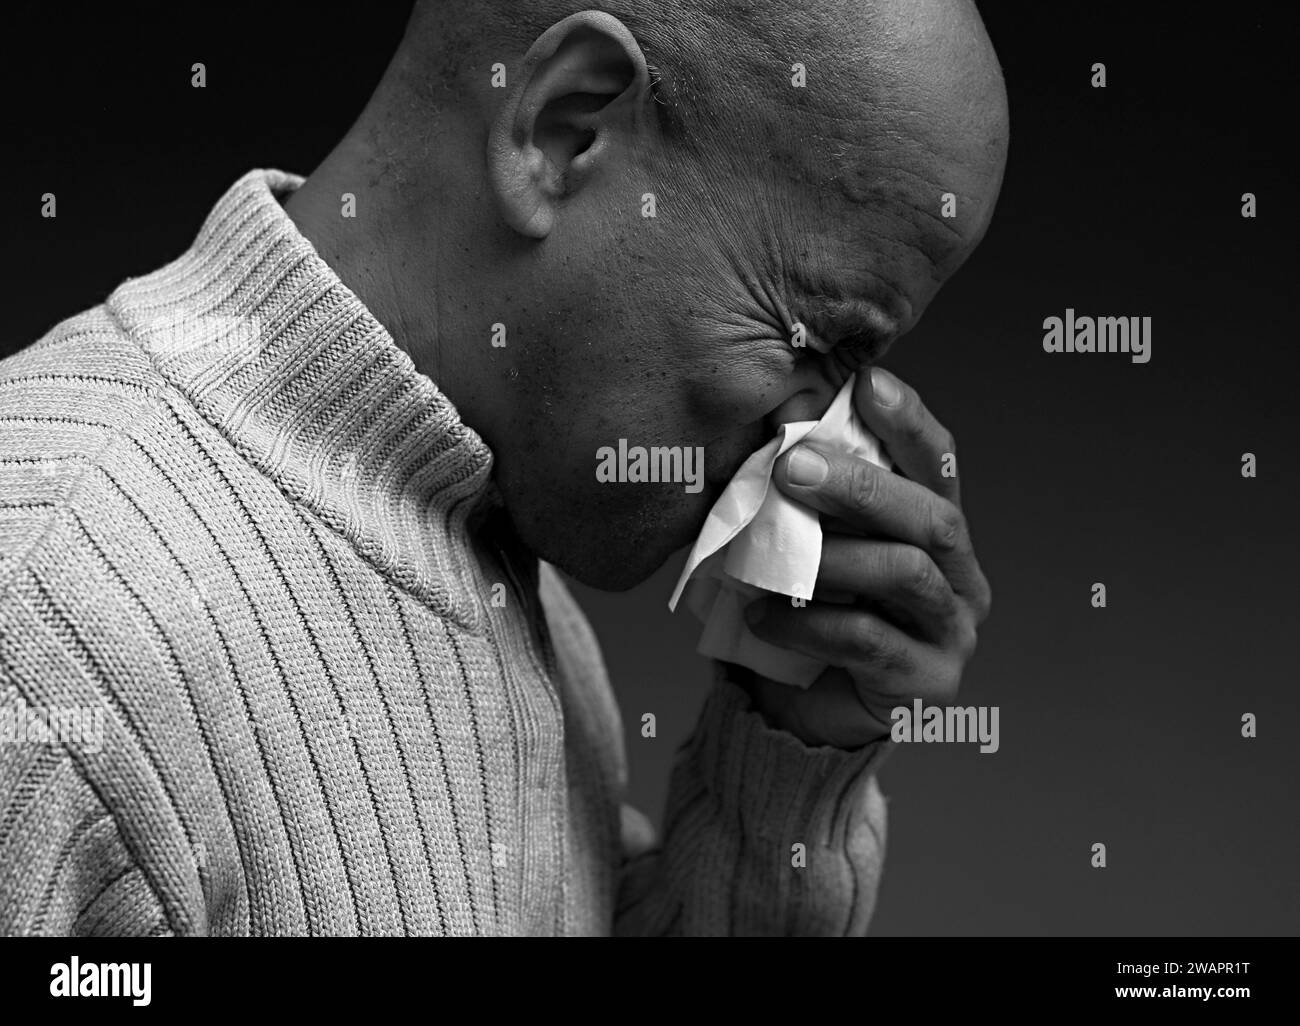 blowing nose after catching the cold and flu with grey background with people stock image stock photo Stock Photo